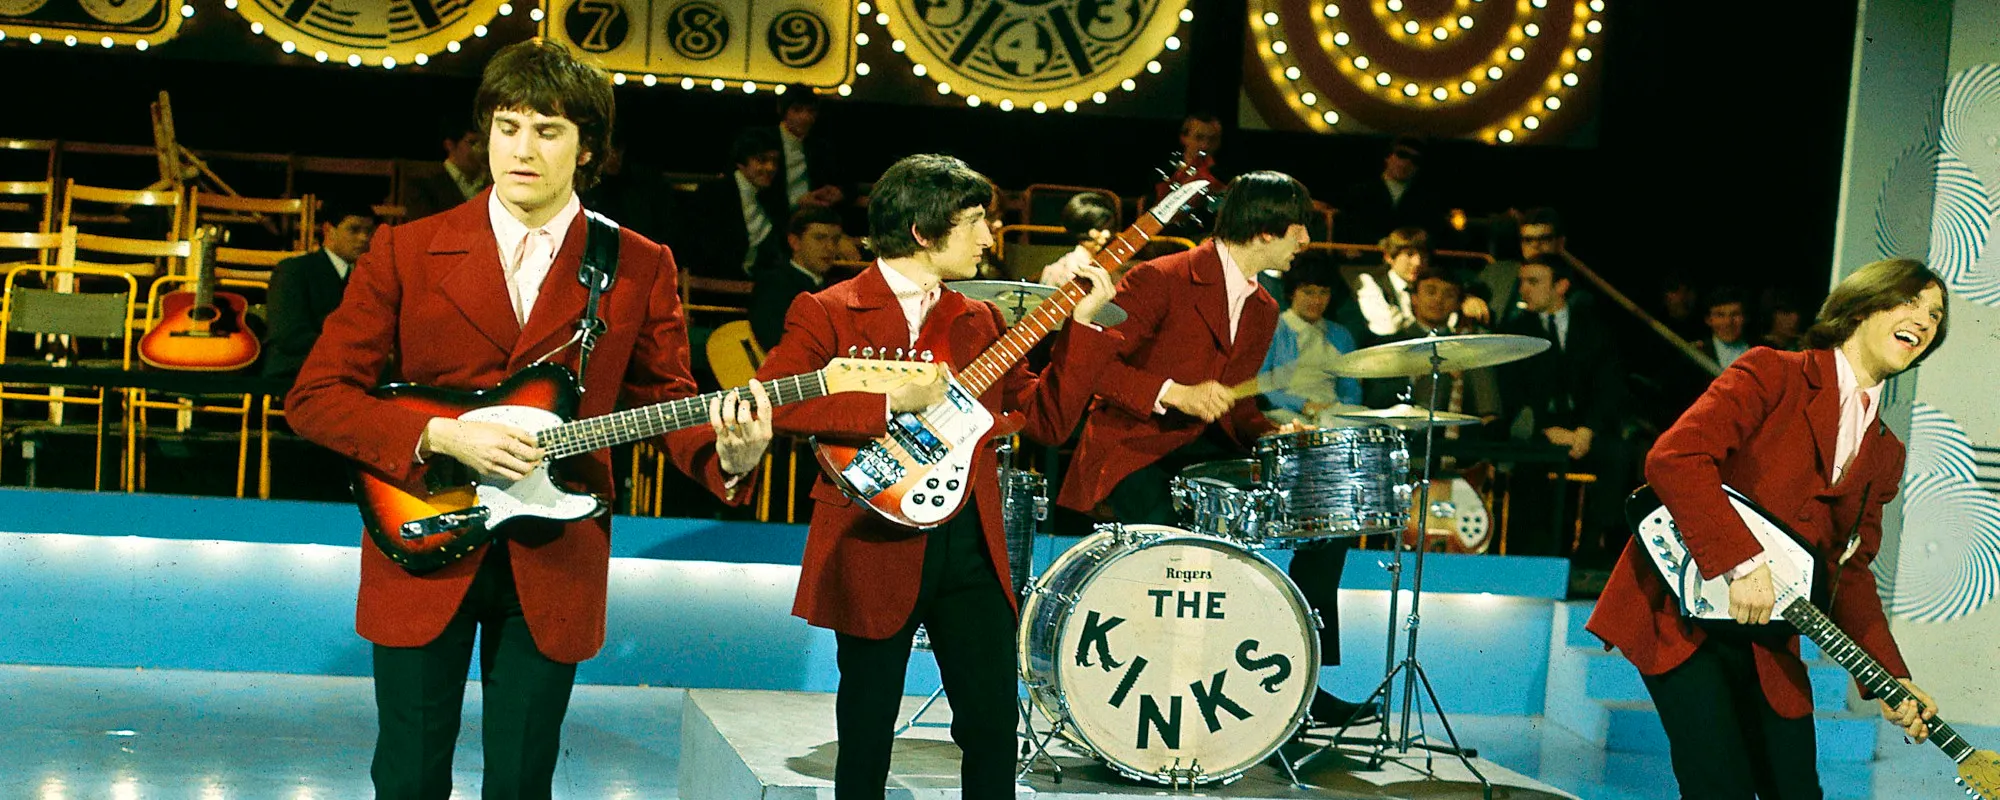 Ranking the 5 Best Slow Songs by The Kinks